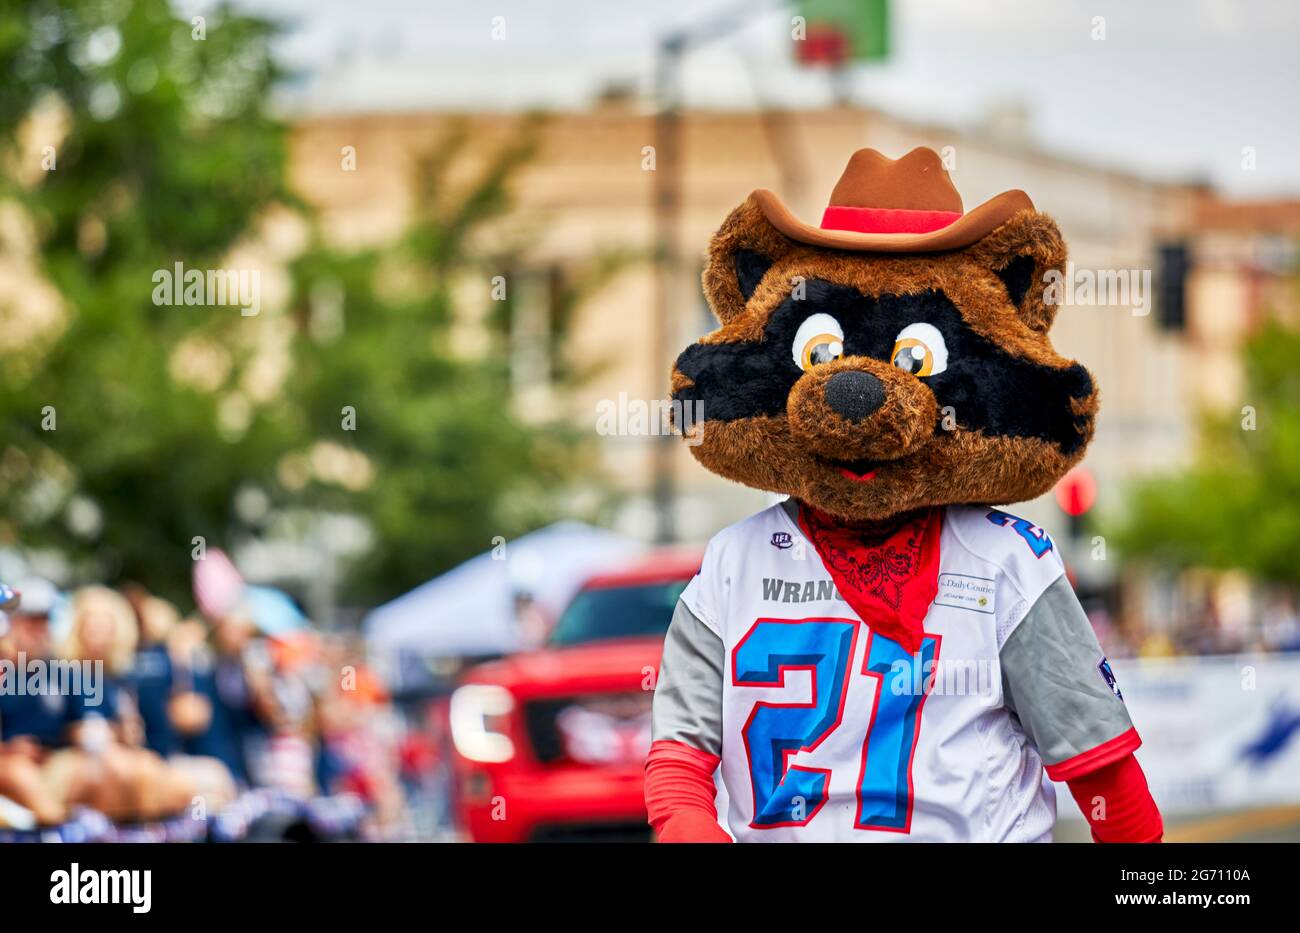 Prescott, Arizona, USA - July 3, 2021: Participant wearing a Raccoon costume while marching in the 4th of July parade Stock Photo